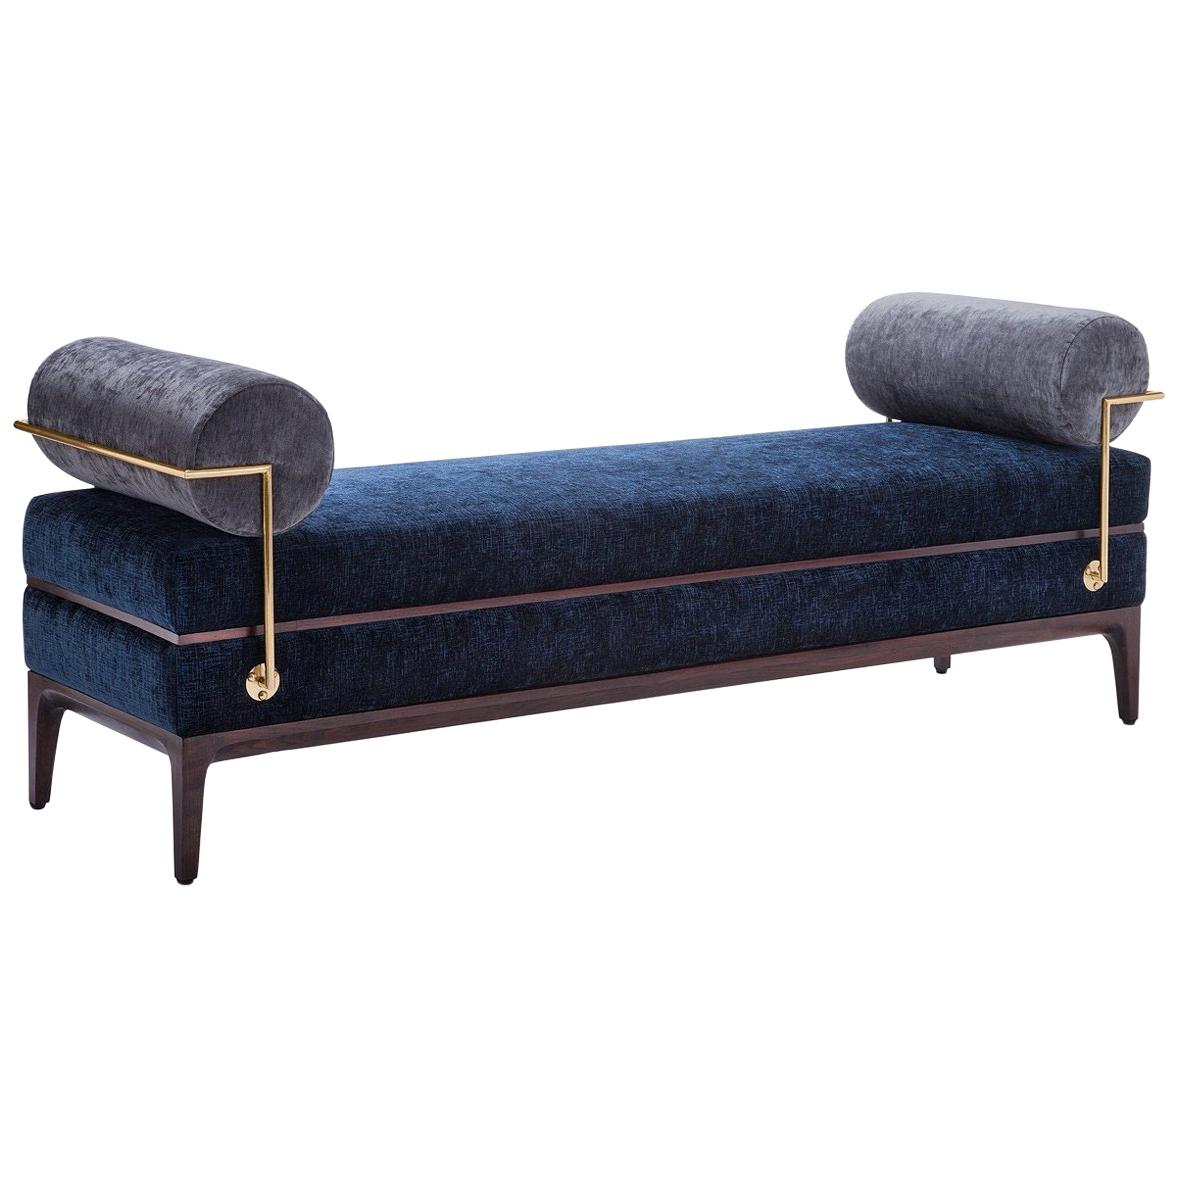 Contemporary Velvet Bench Inspired by the Opulence of the Roaring, 1920s